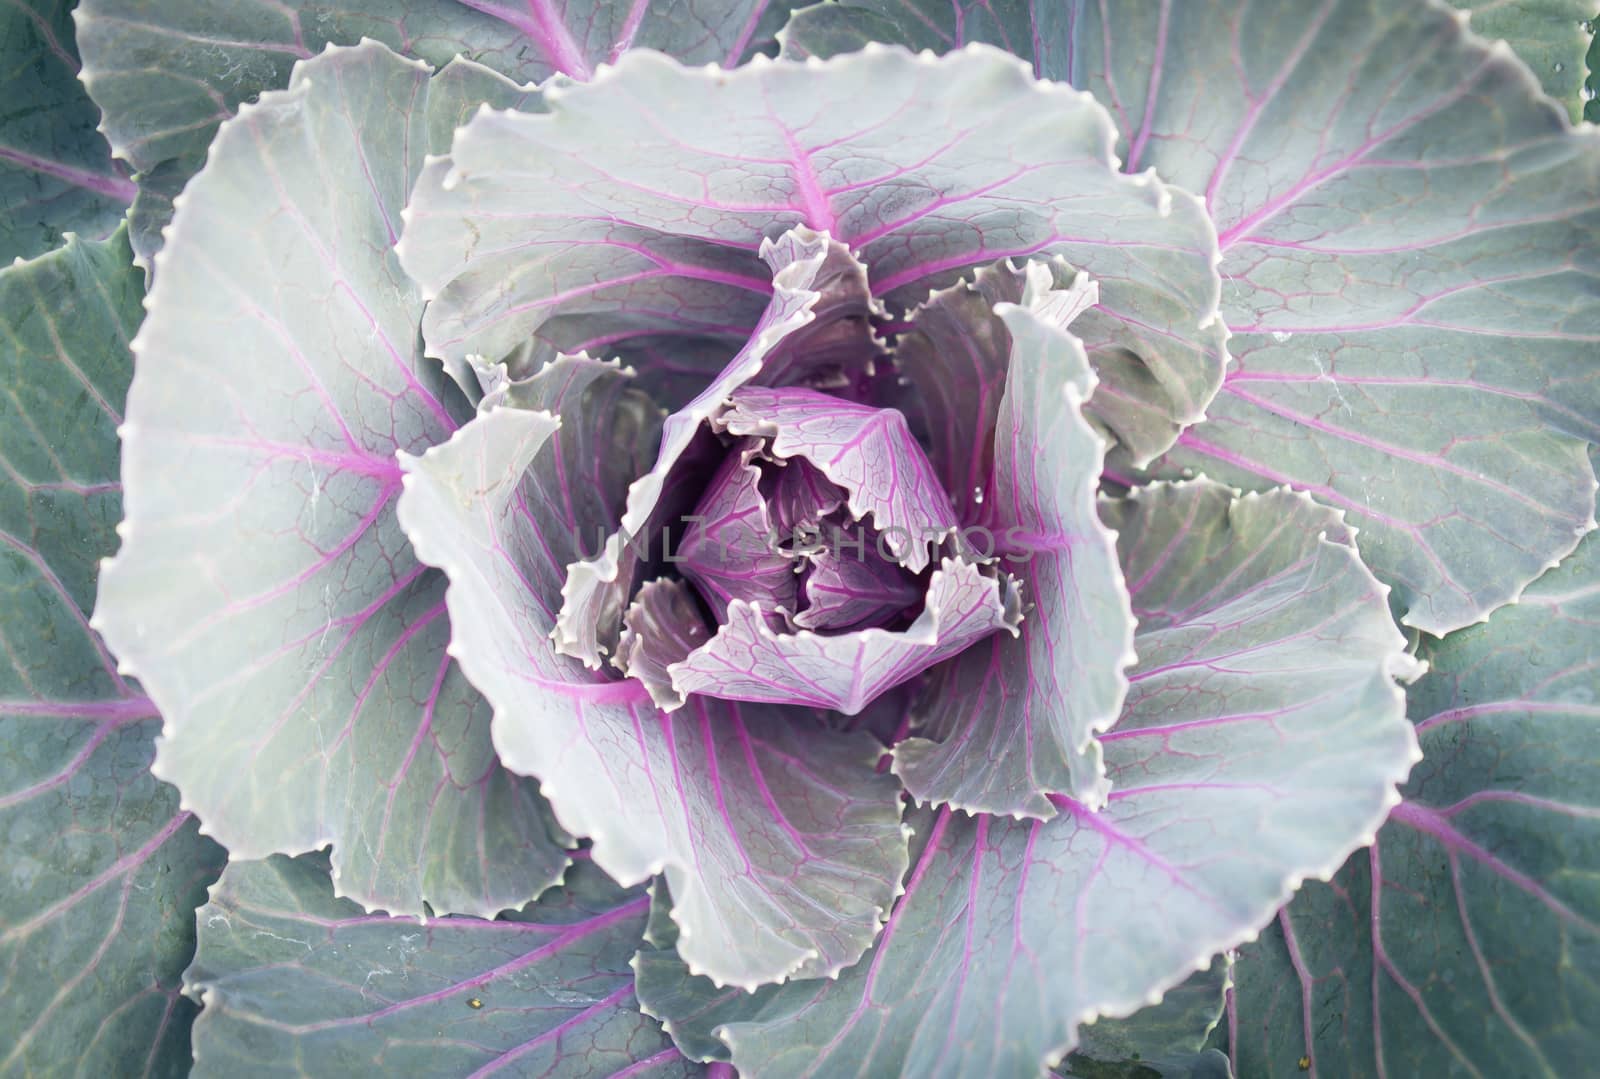 Violet or purple Cabbages for design. Cabbages background in garden. Beautiful ornament Cabbages in natural. Fresh Kale Cabbages 
texture leaves.